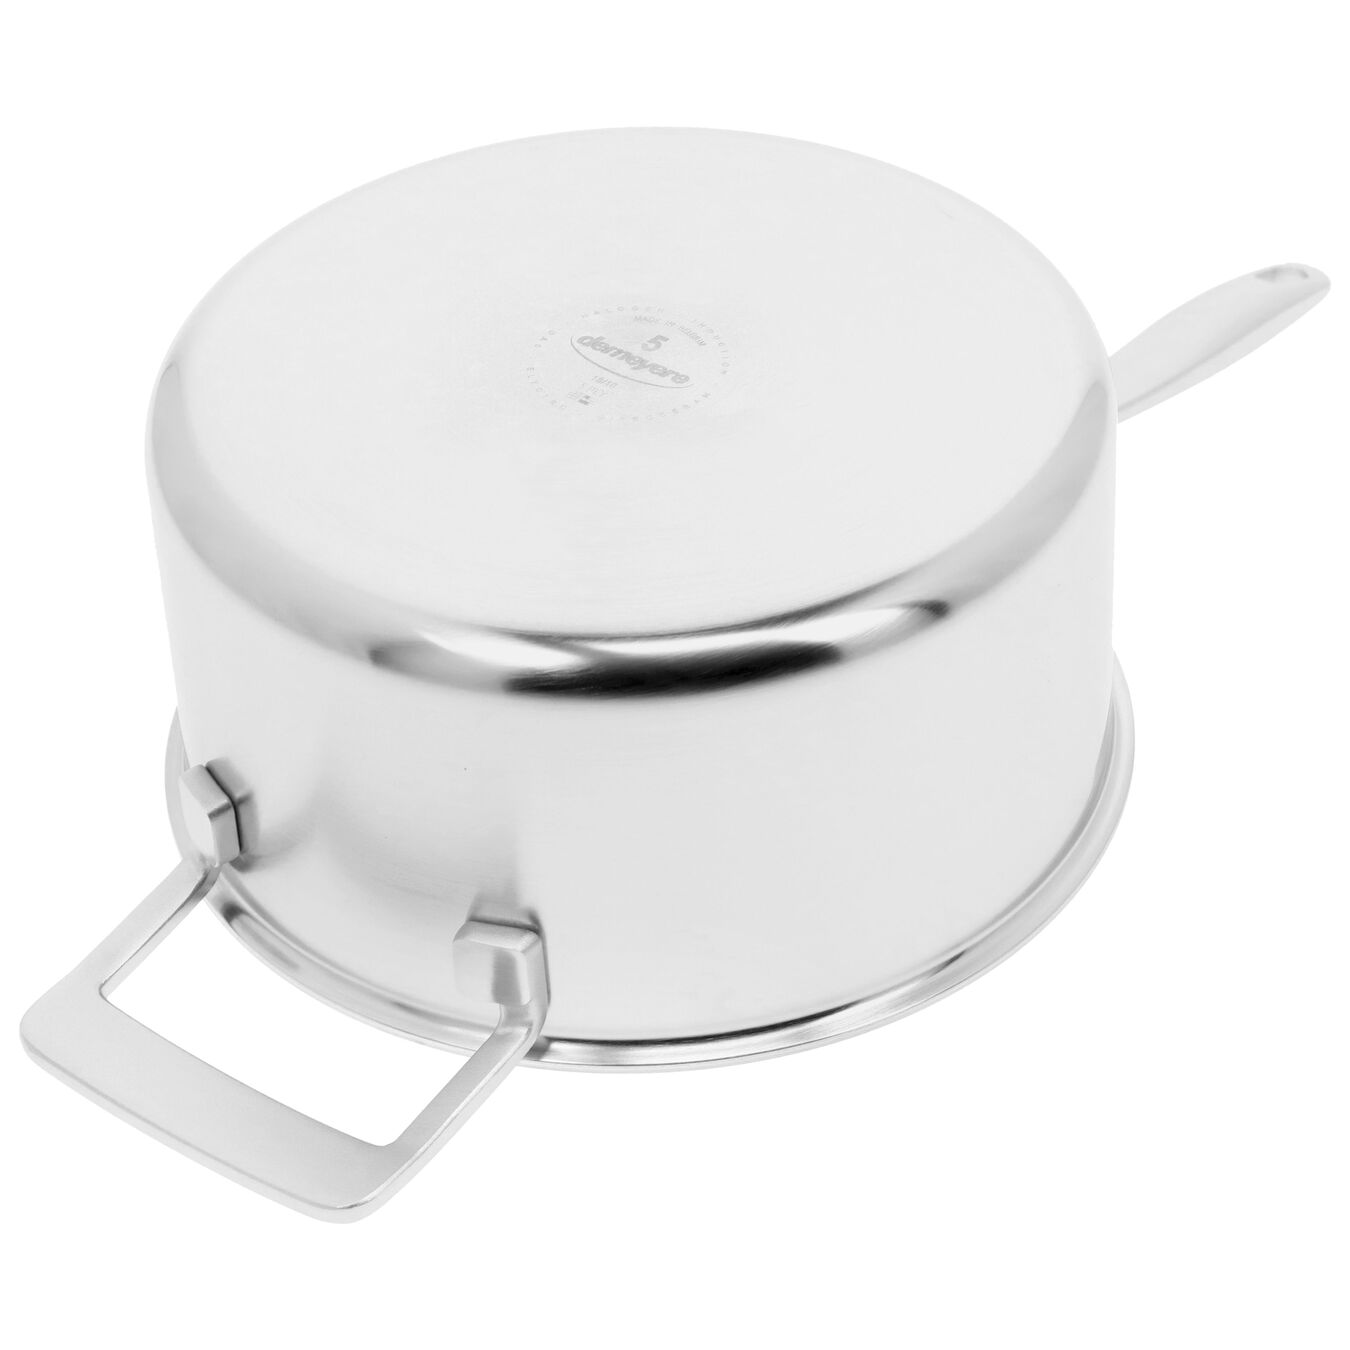 4 l 18/10 Stainless Steel round Sauce pan with lid, silver,,large 7